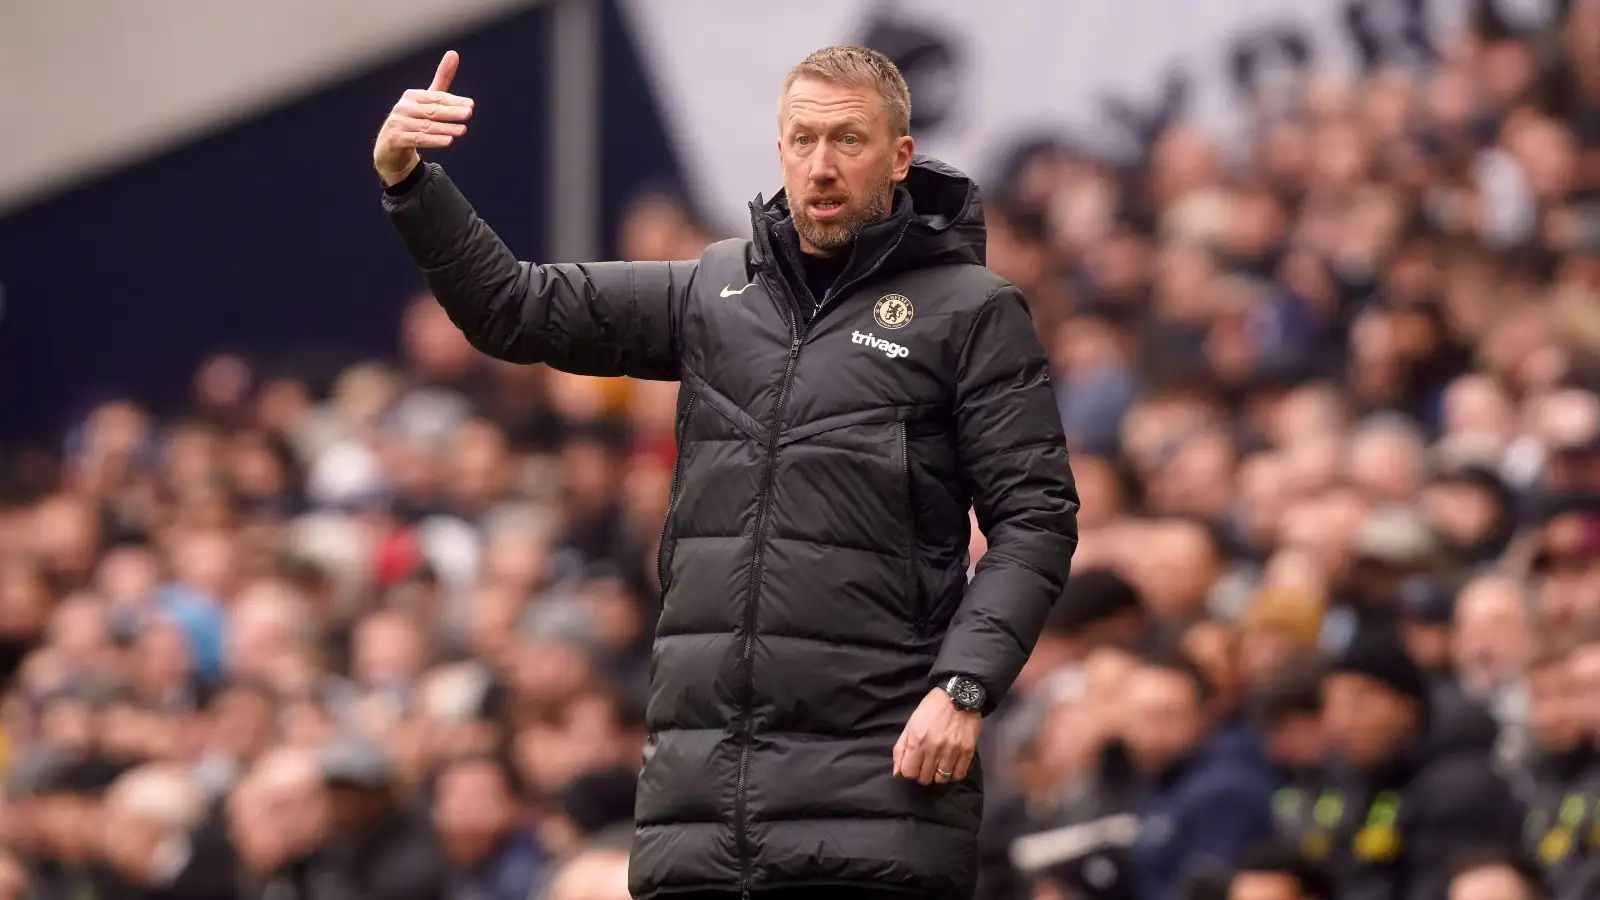 Chelsea boss Graham Potter shouts instructions to his team